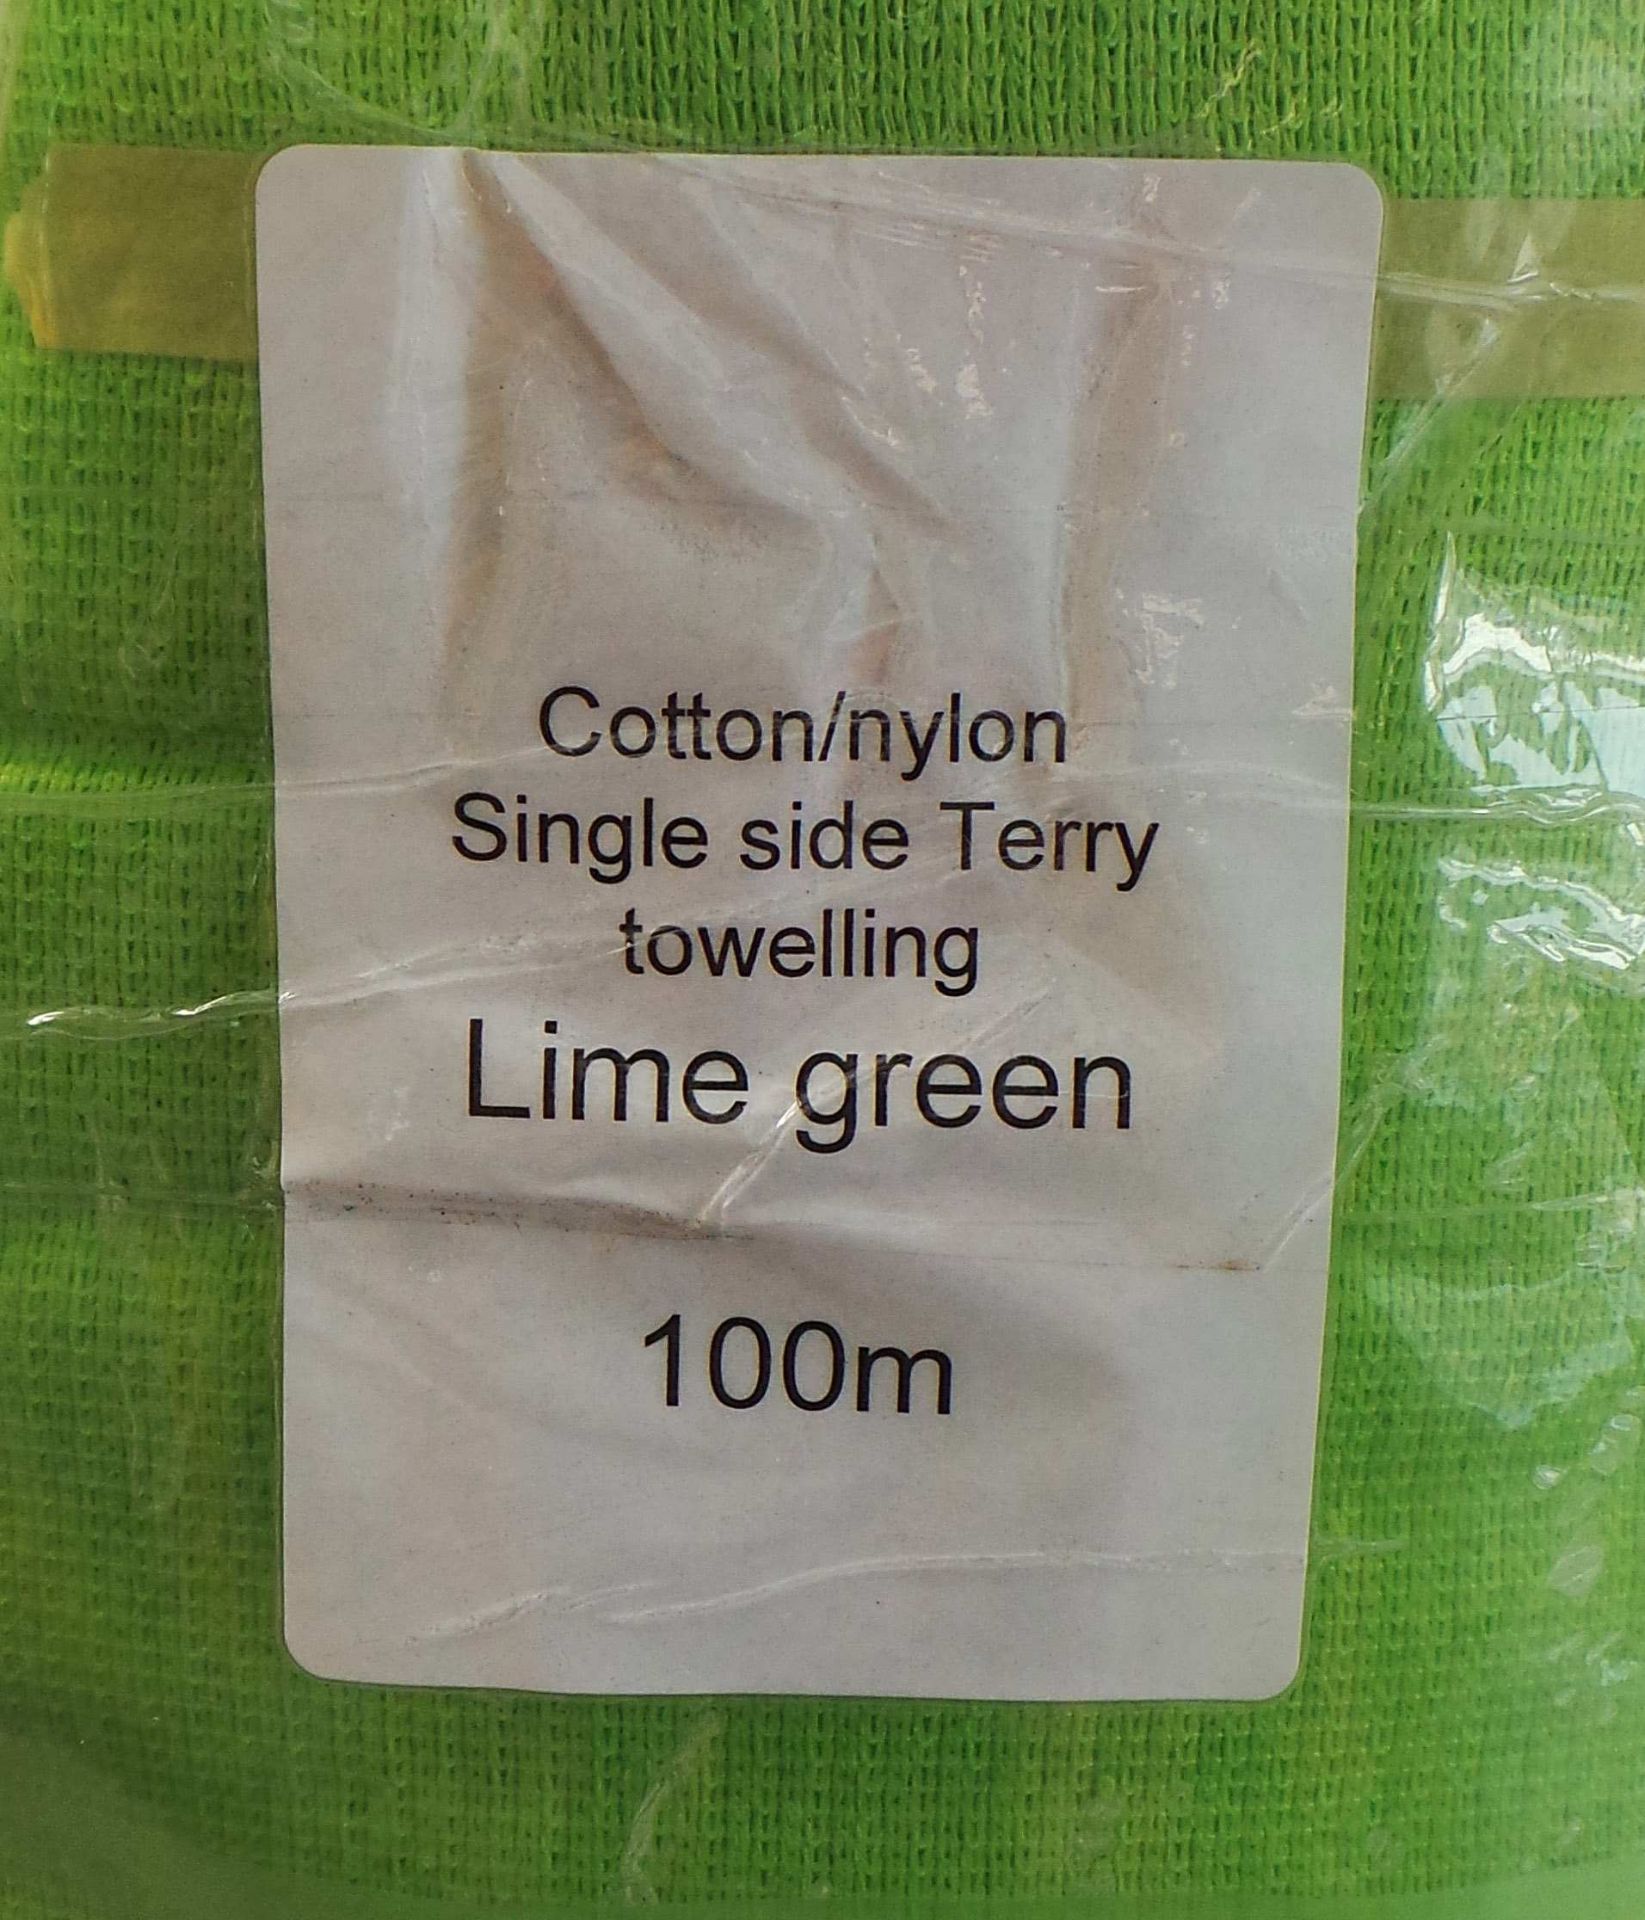 One Off Joblot of 100 Square Metres of Lime Green Terry Cotton/Nylon Fabrics - Image 3 of 5